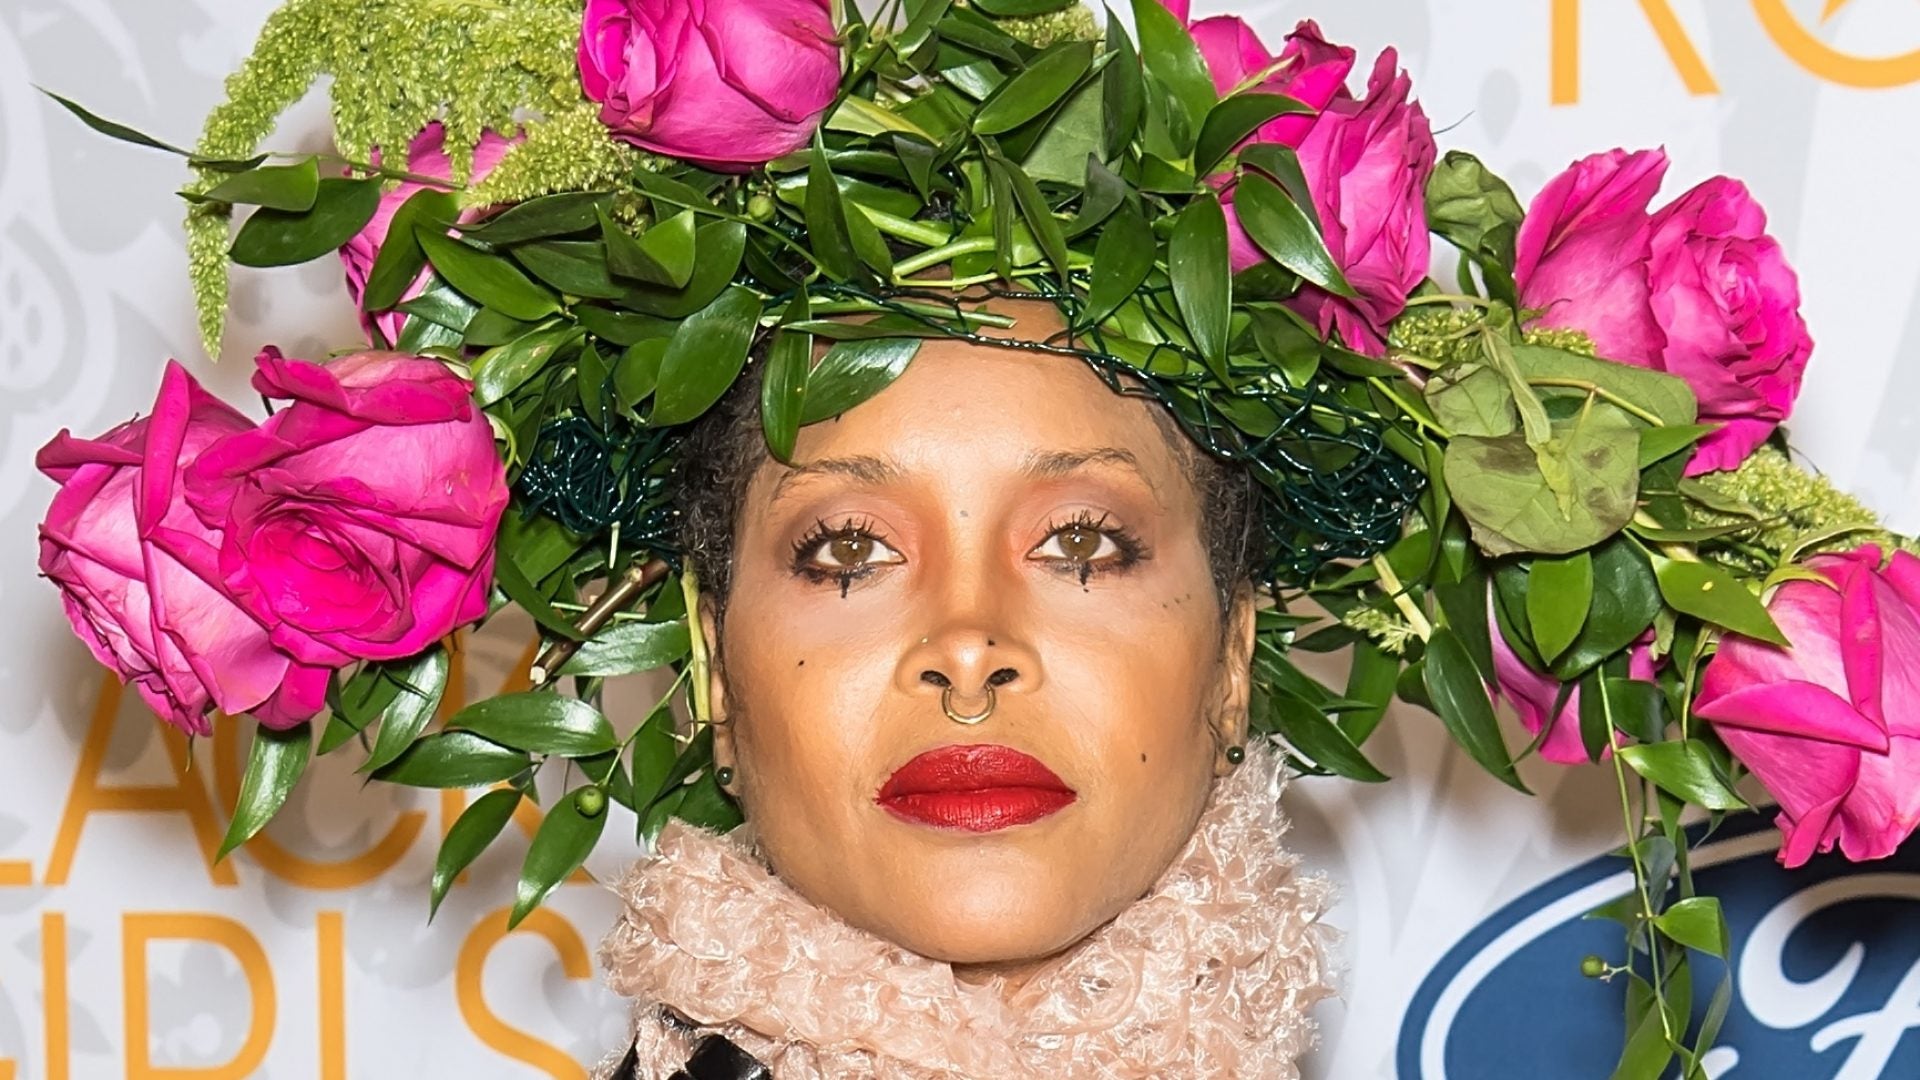 Erykah Badu's Online Store Is Coming — Here's What We Know